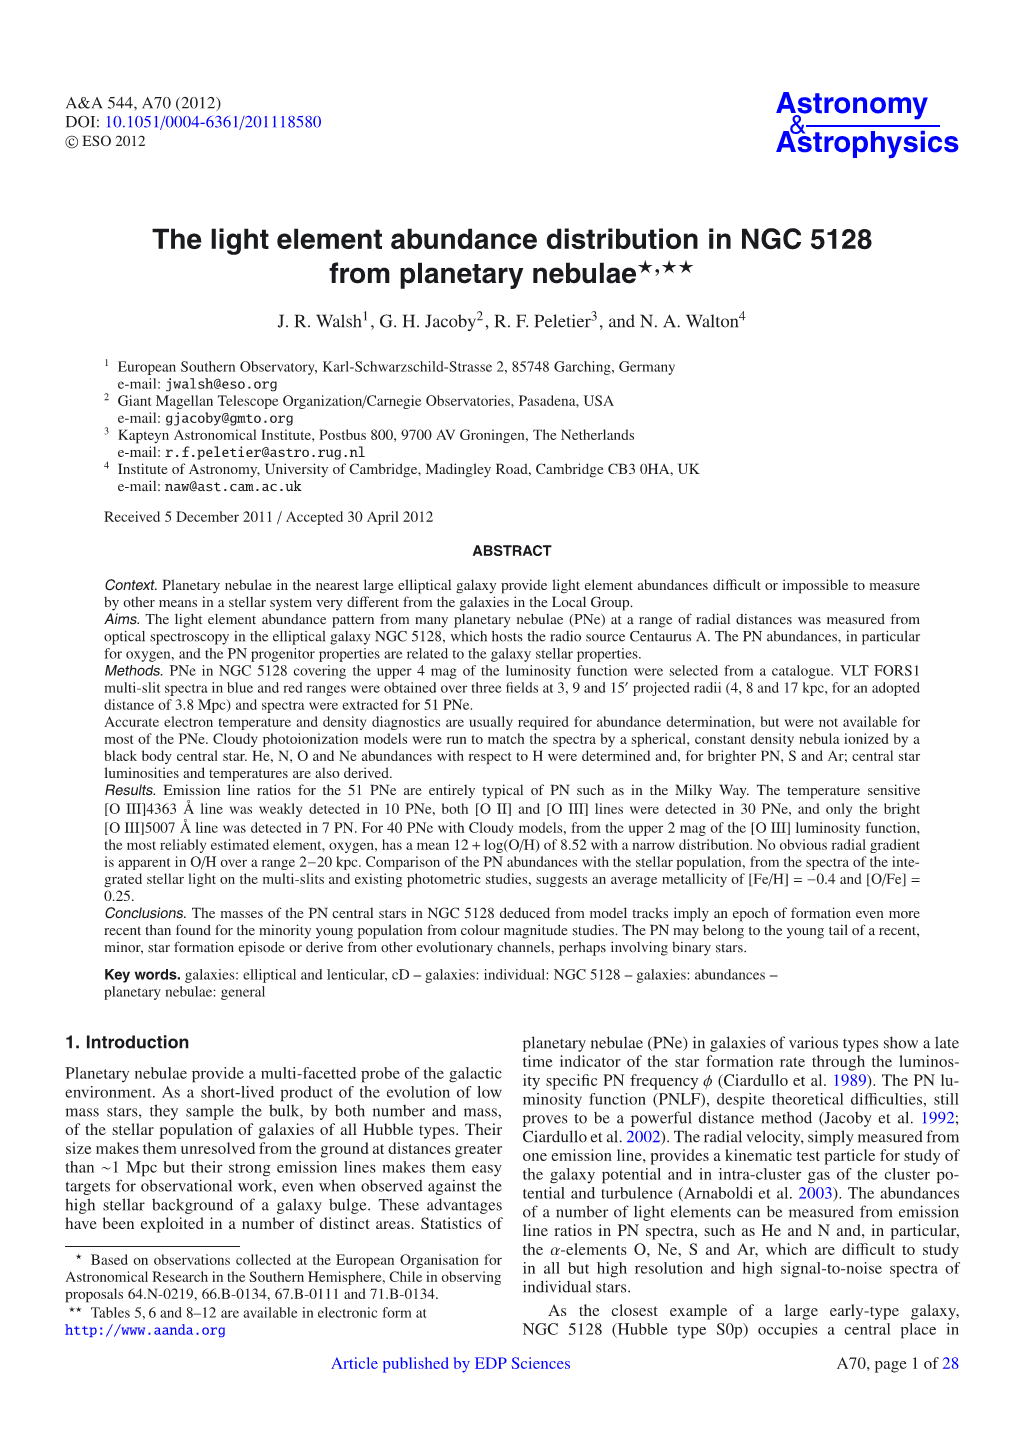 The Light Element Abundance Distribution in NGC 5128 from Planetary Nebulae�,